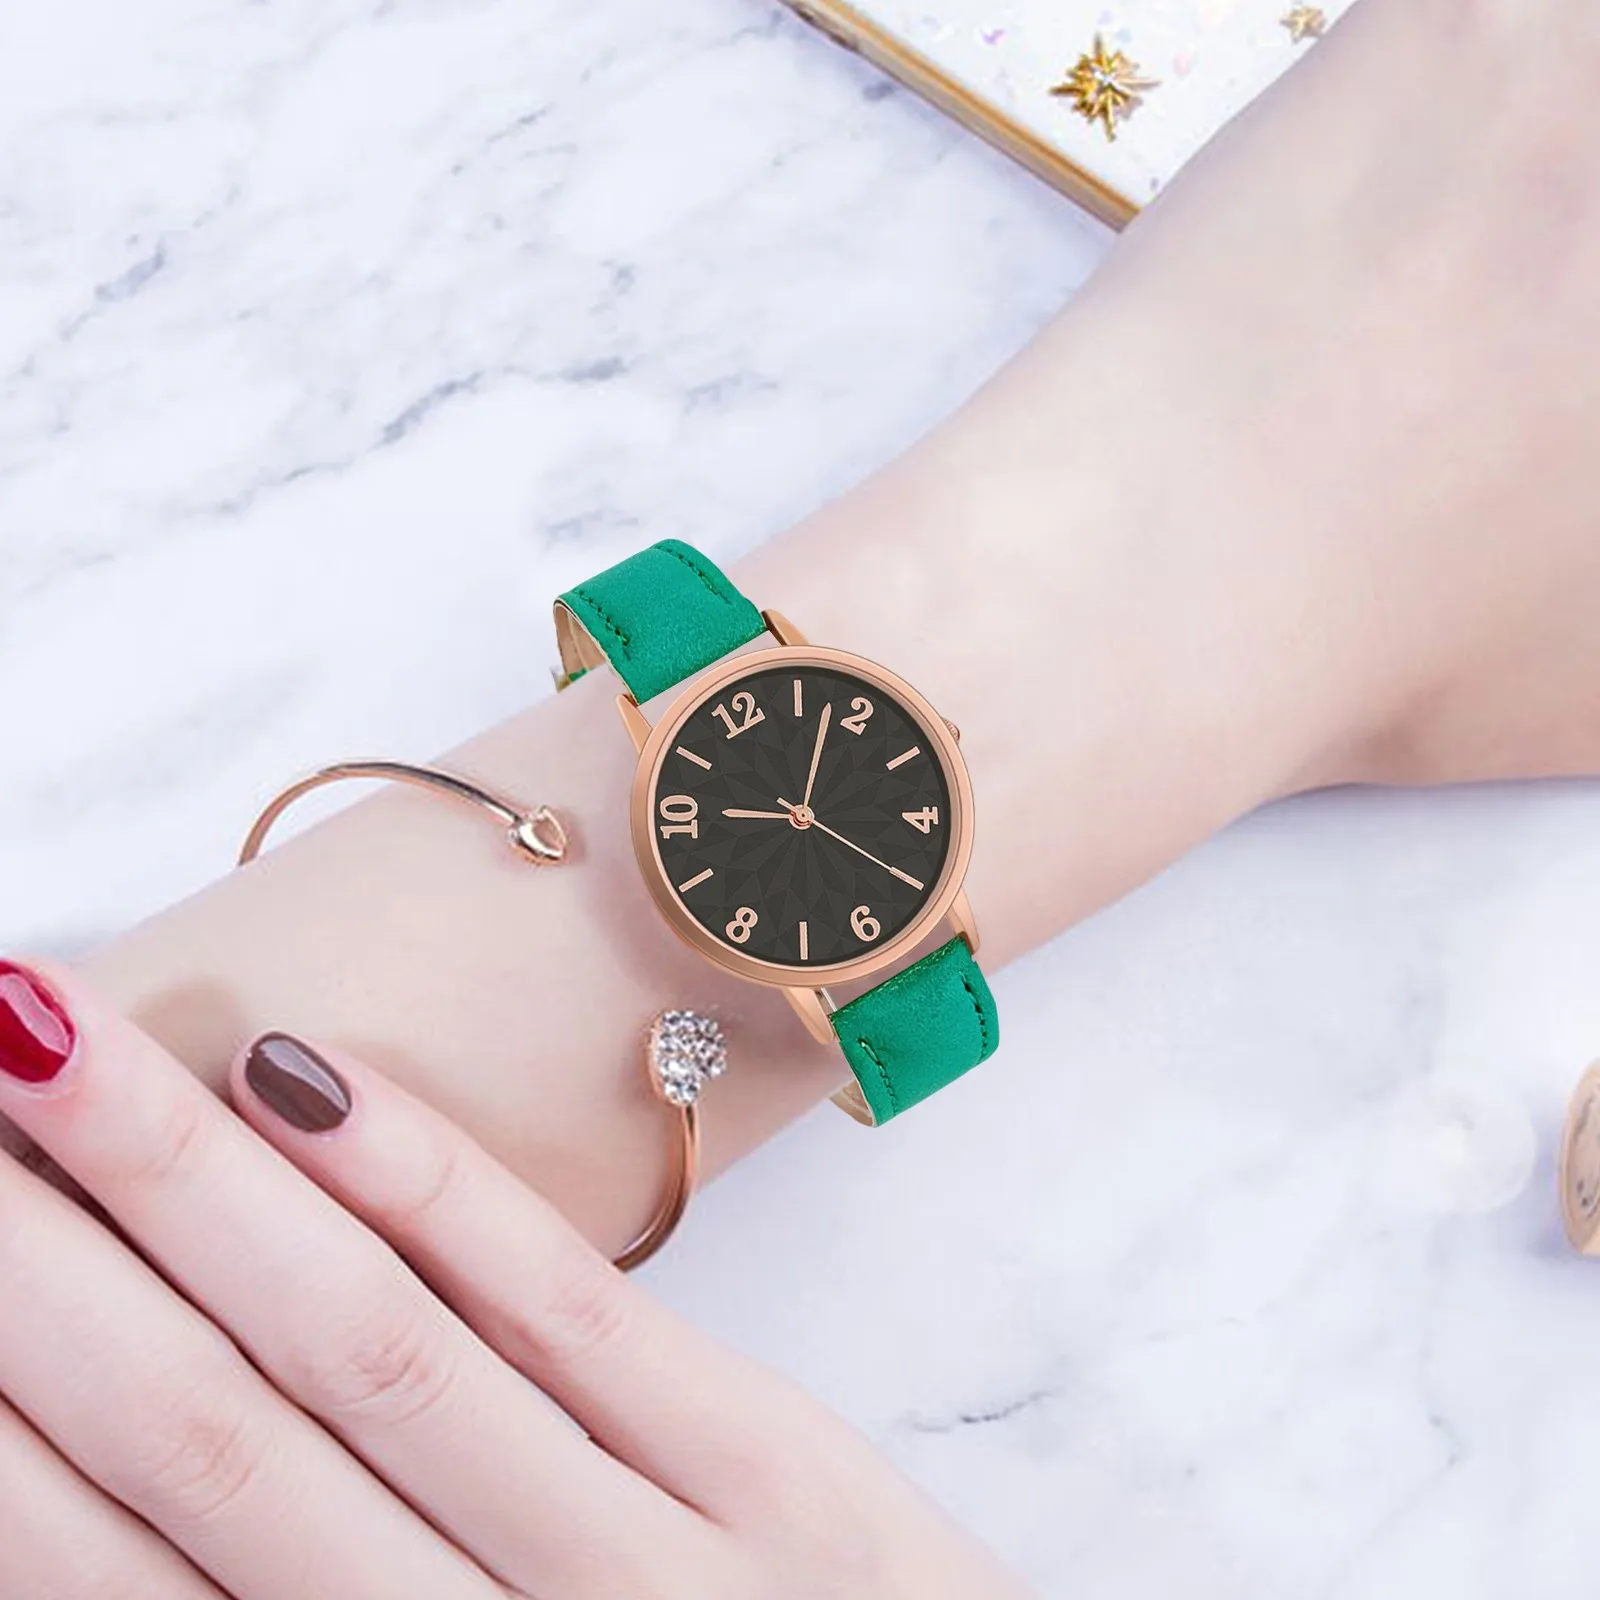 

Fashion Ladies Watches Easy To Read Arabic Numerals Simple Dial Quartz Watch Leather Strap Clock Dress Wristwatches Reloj Mujer